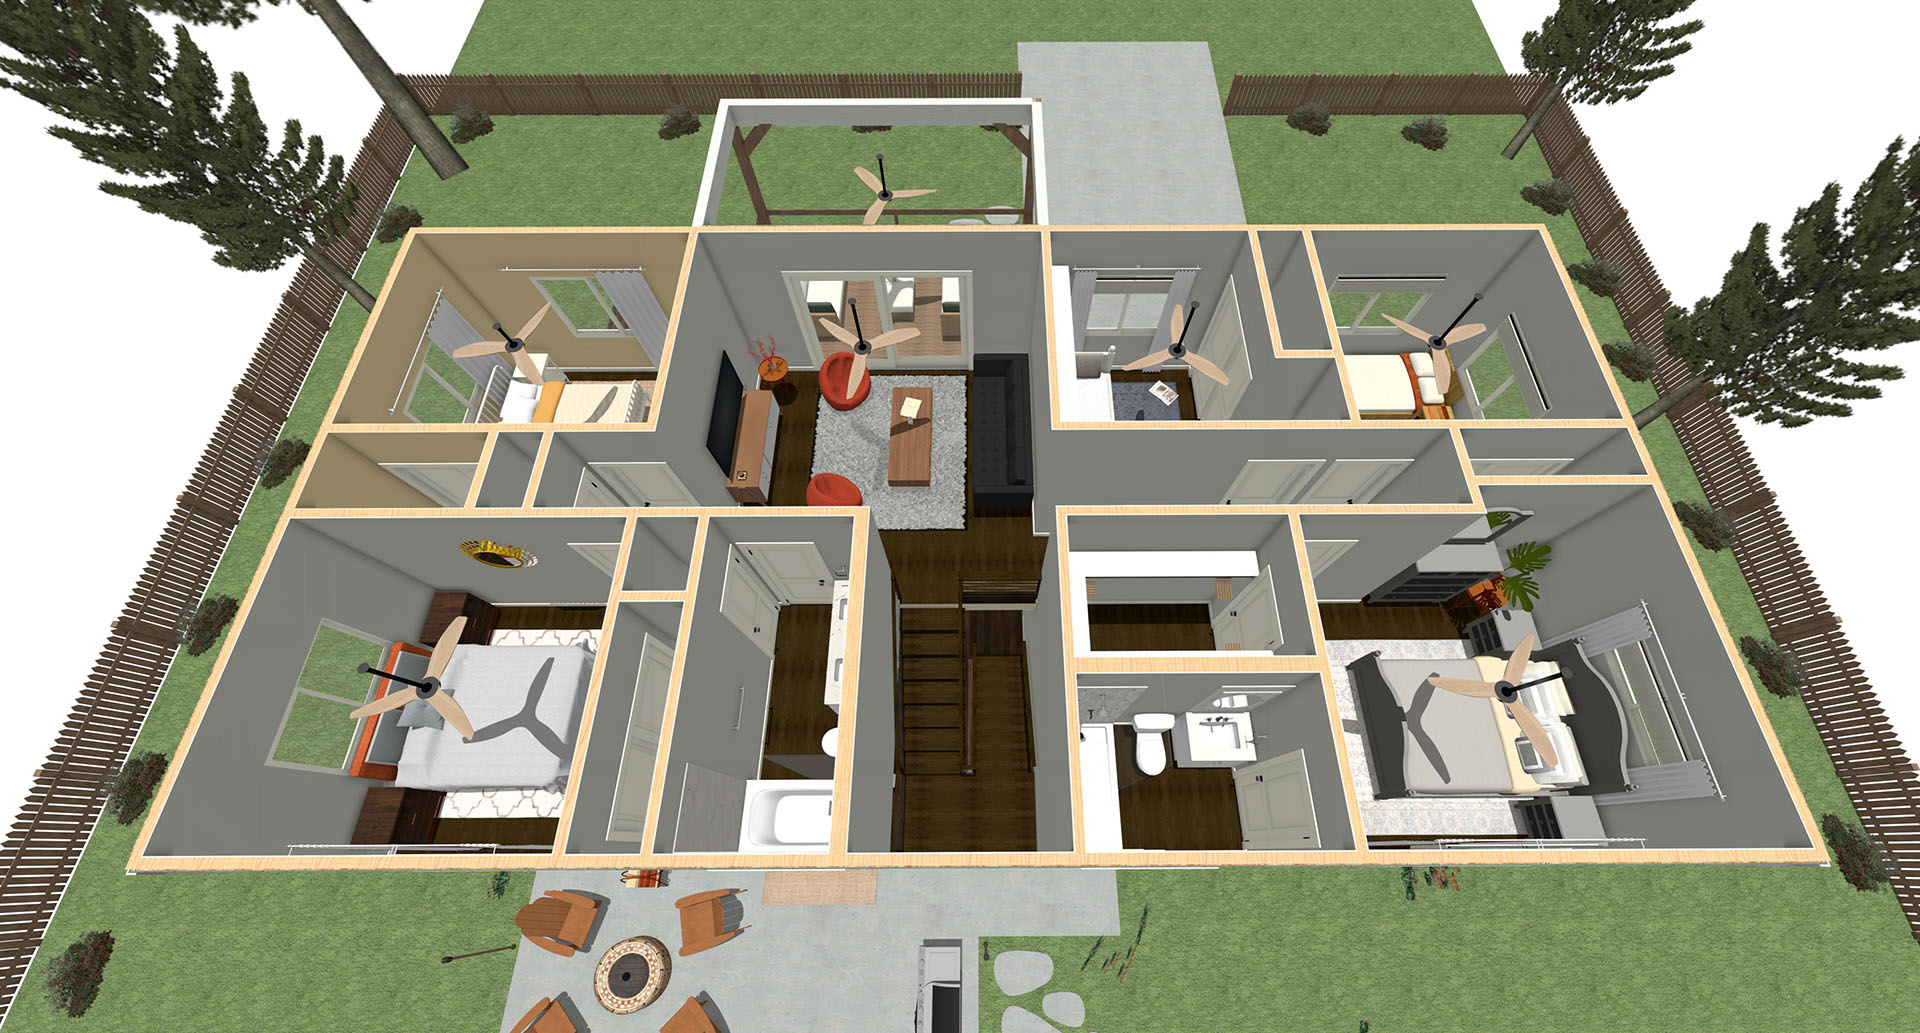 Aerial view of a house's downstairs area that has eight rooms